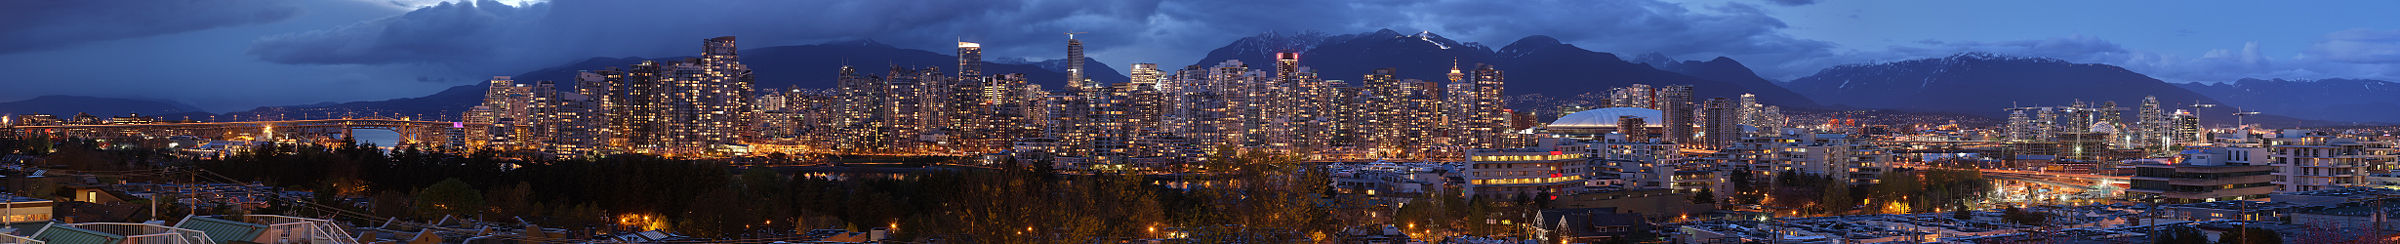 A high resolution panorama of Vancouver with the mountains behind as viewed from the south